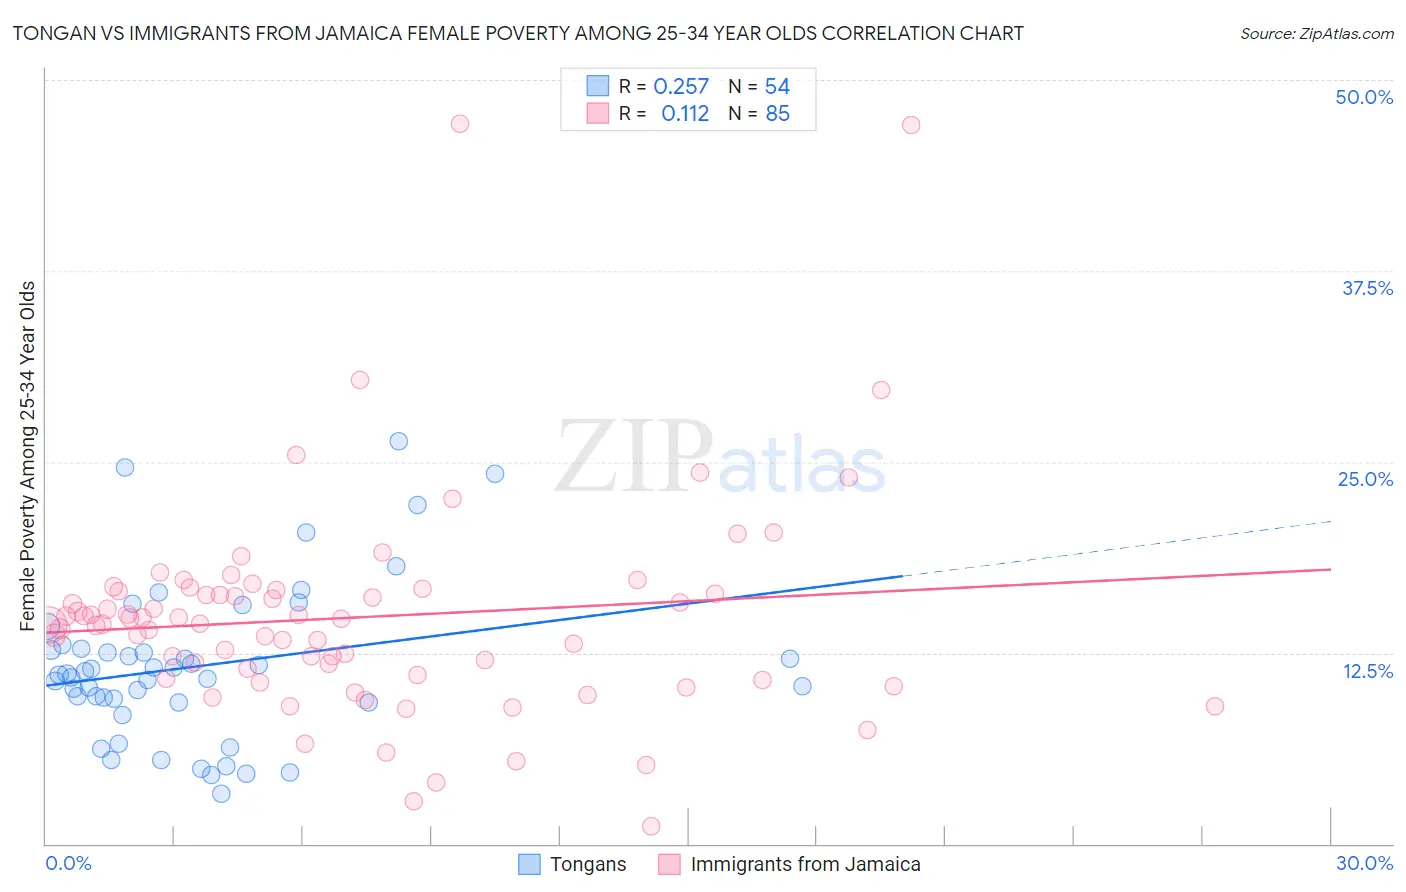 Tongan vs Immigrants from Jamaica Female Poverty Among 25-34 Year Olds